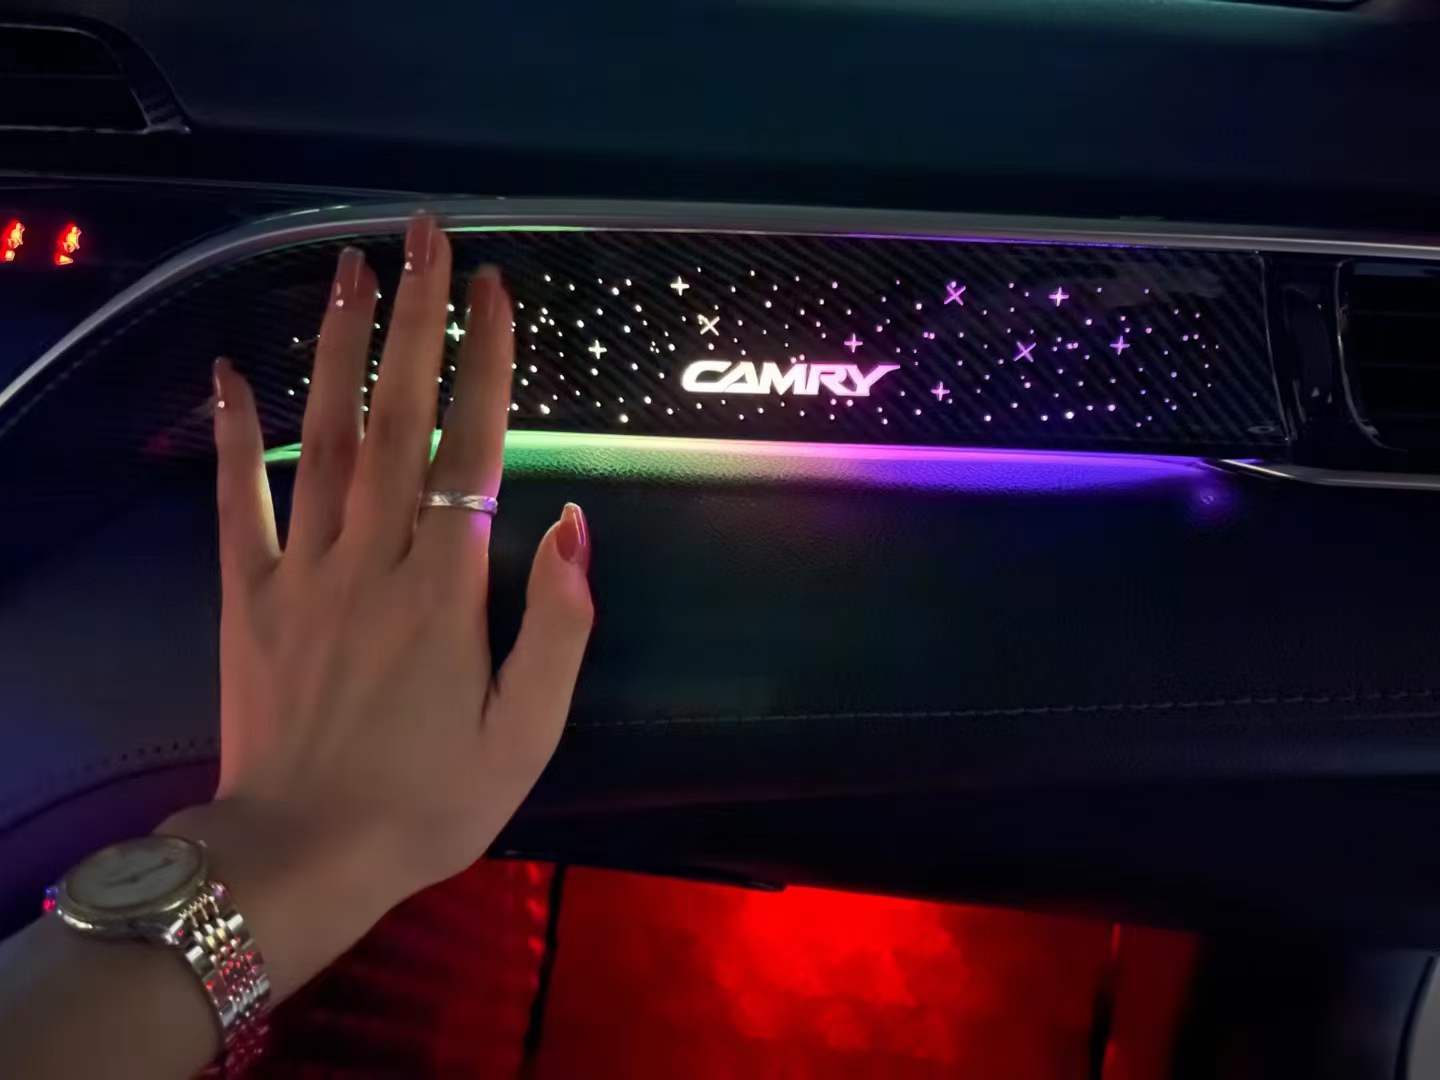 Eight generations of Camry special atmosphere light